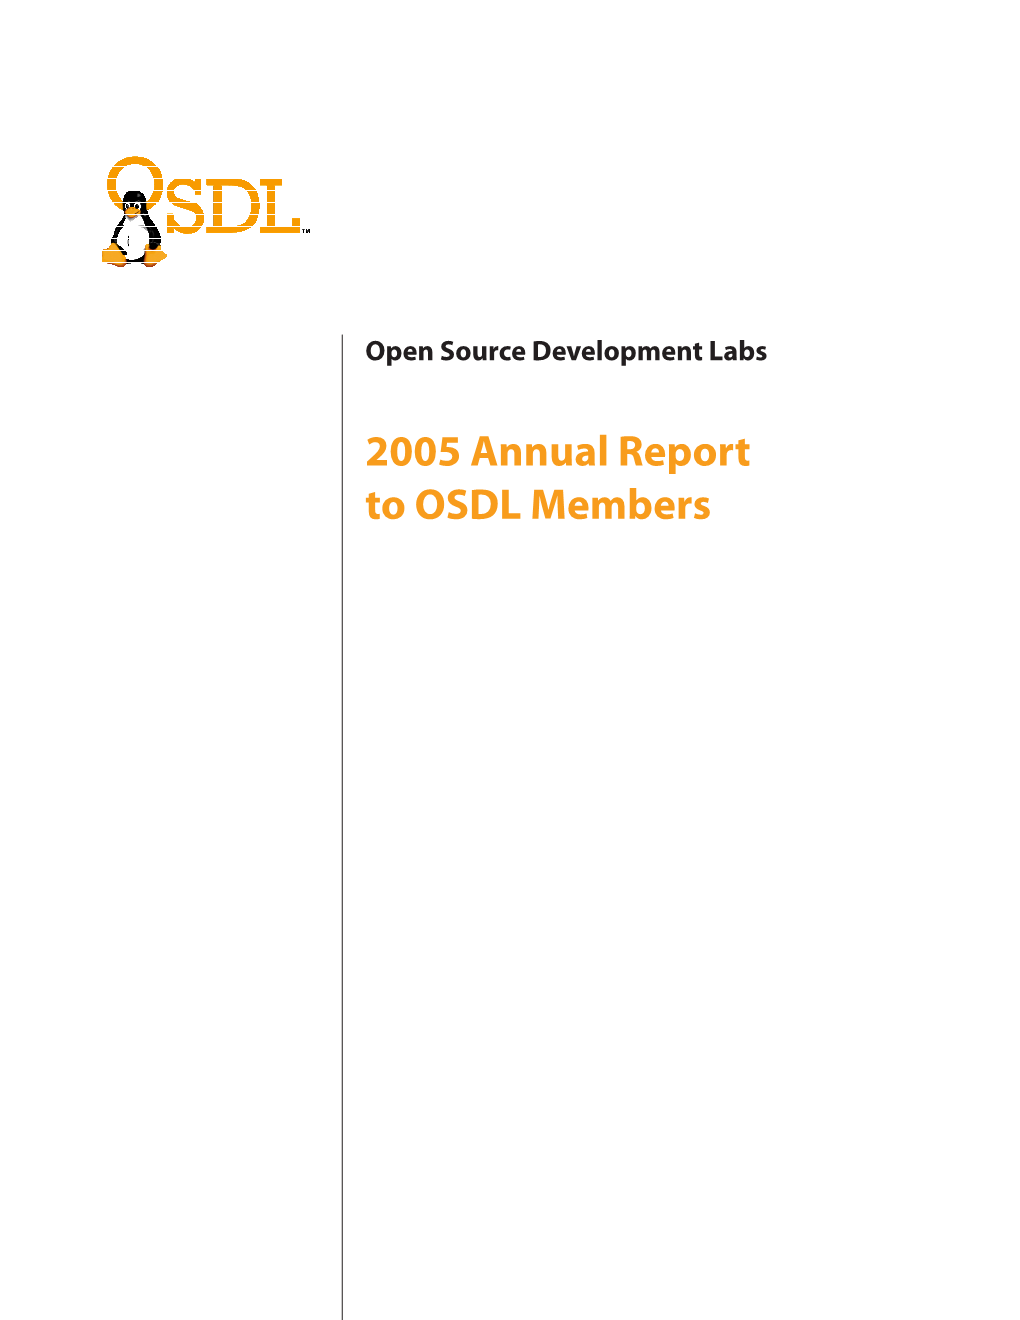 2005 Annual Report to OSDL Members  Open Source Development Labs